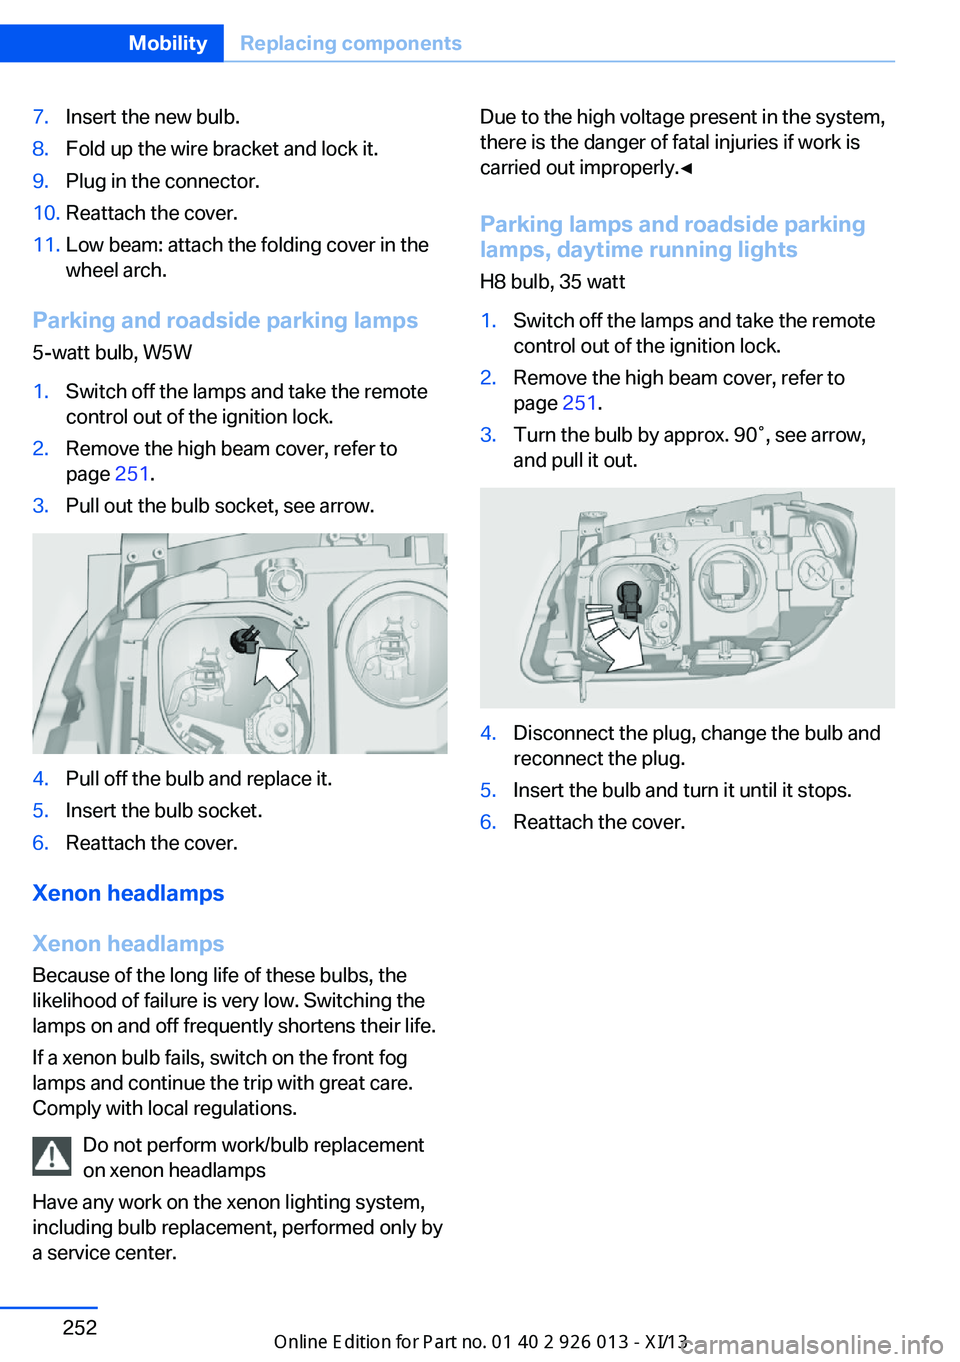 BMW X1 2013 E84 User Guide 7.Insert the new bulb.8.Fold up the wire bracket and lock it.9.Plug in the connector.10.Reattach the cover.11.Low beam: attach the folding cover in the
wheel arch.
Parking and roadside parking lamps
5